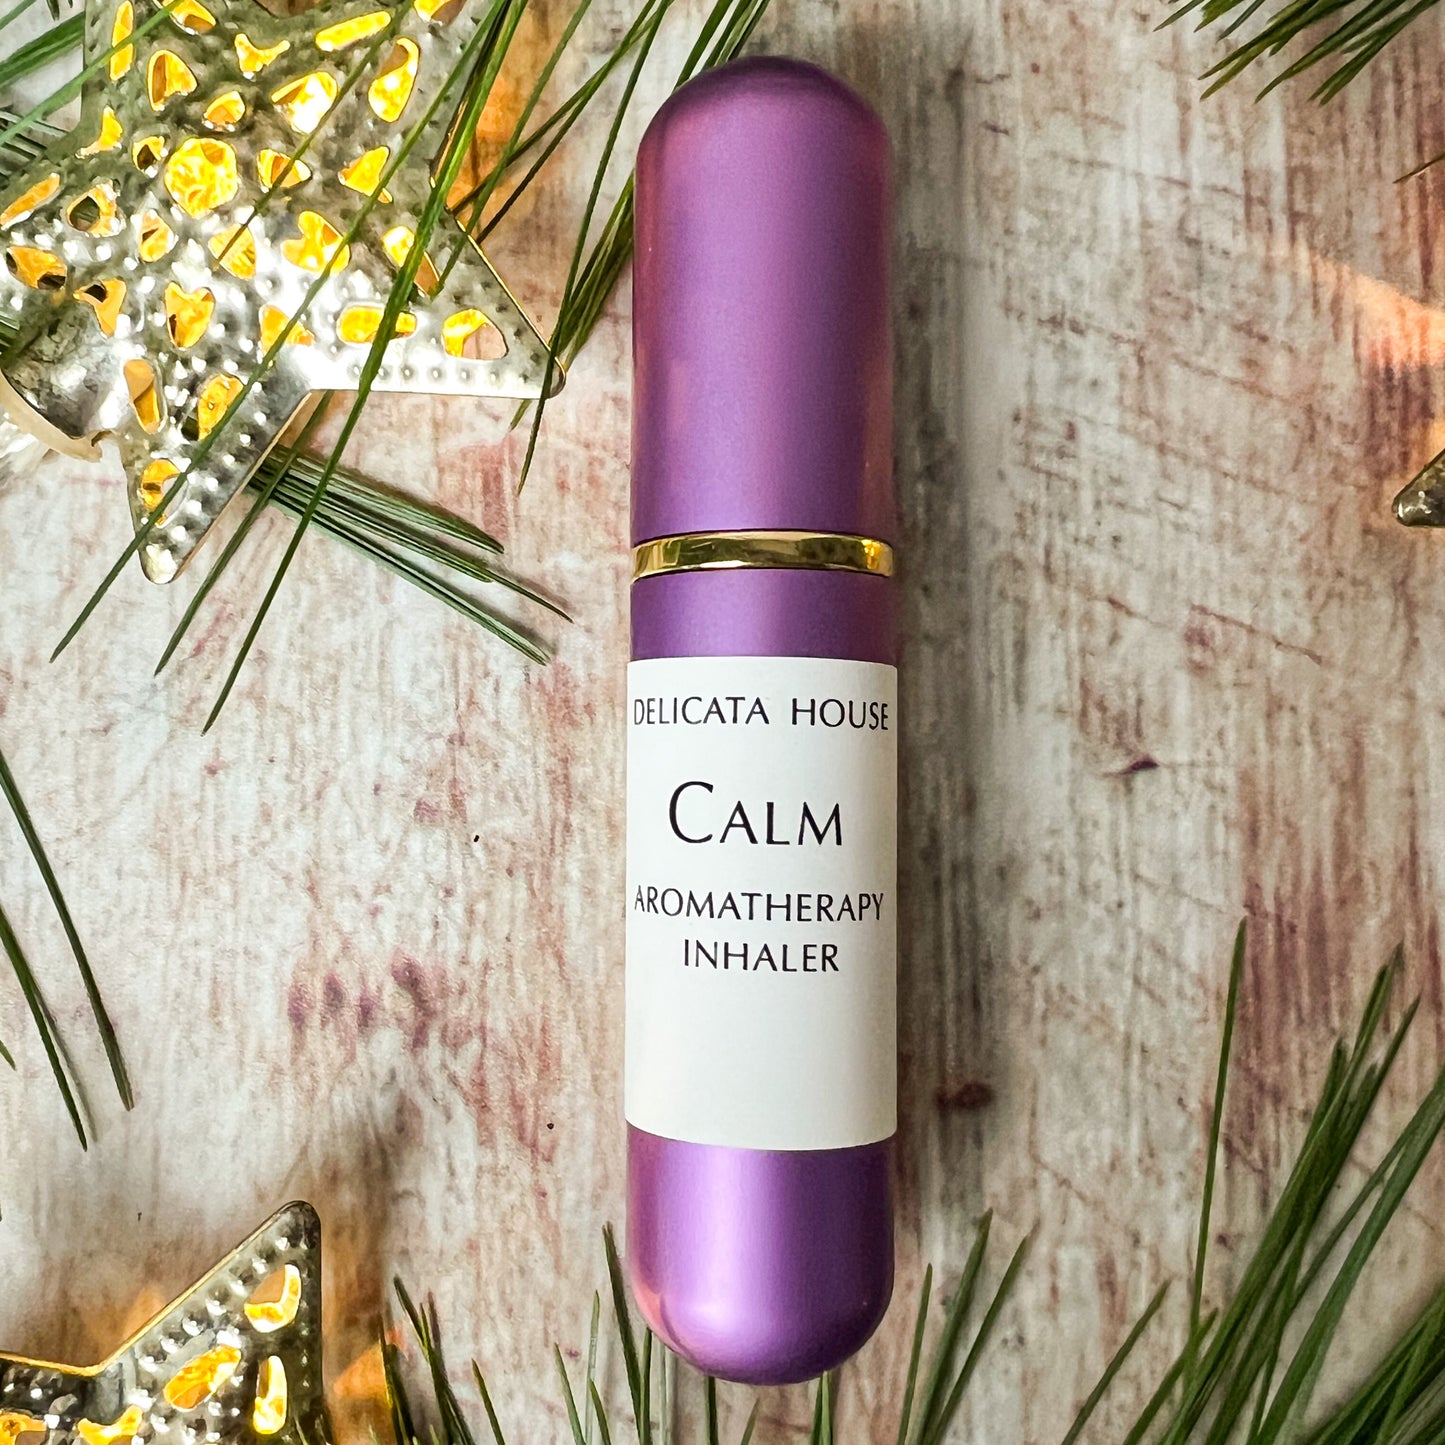 Calm Aromatherapy Nasal Inhaler - Aromatherapy for Calm, Stress Relief & Relaxation